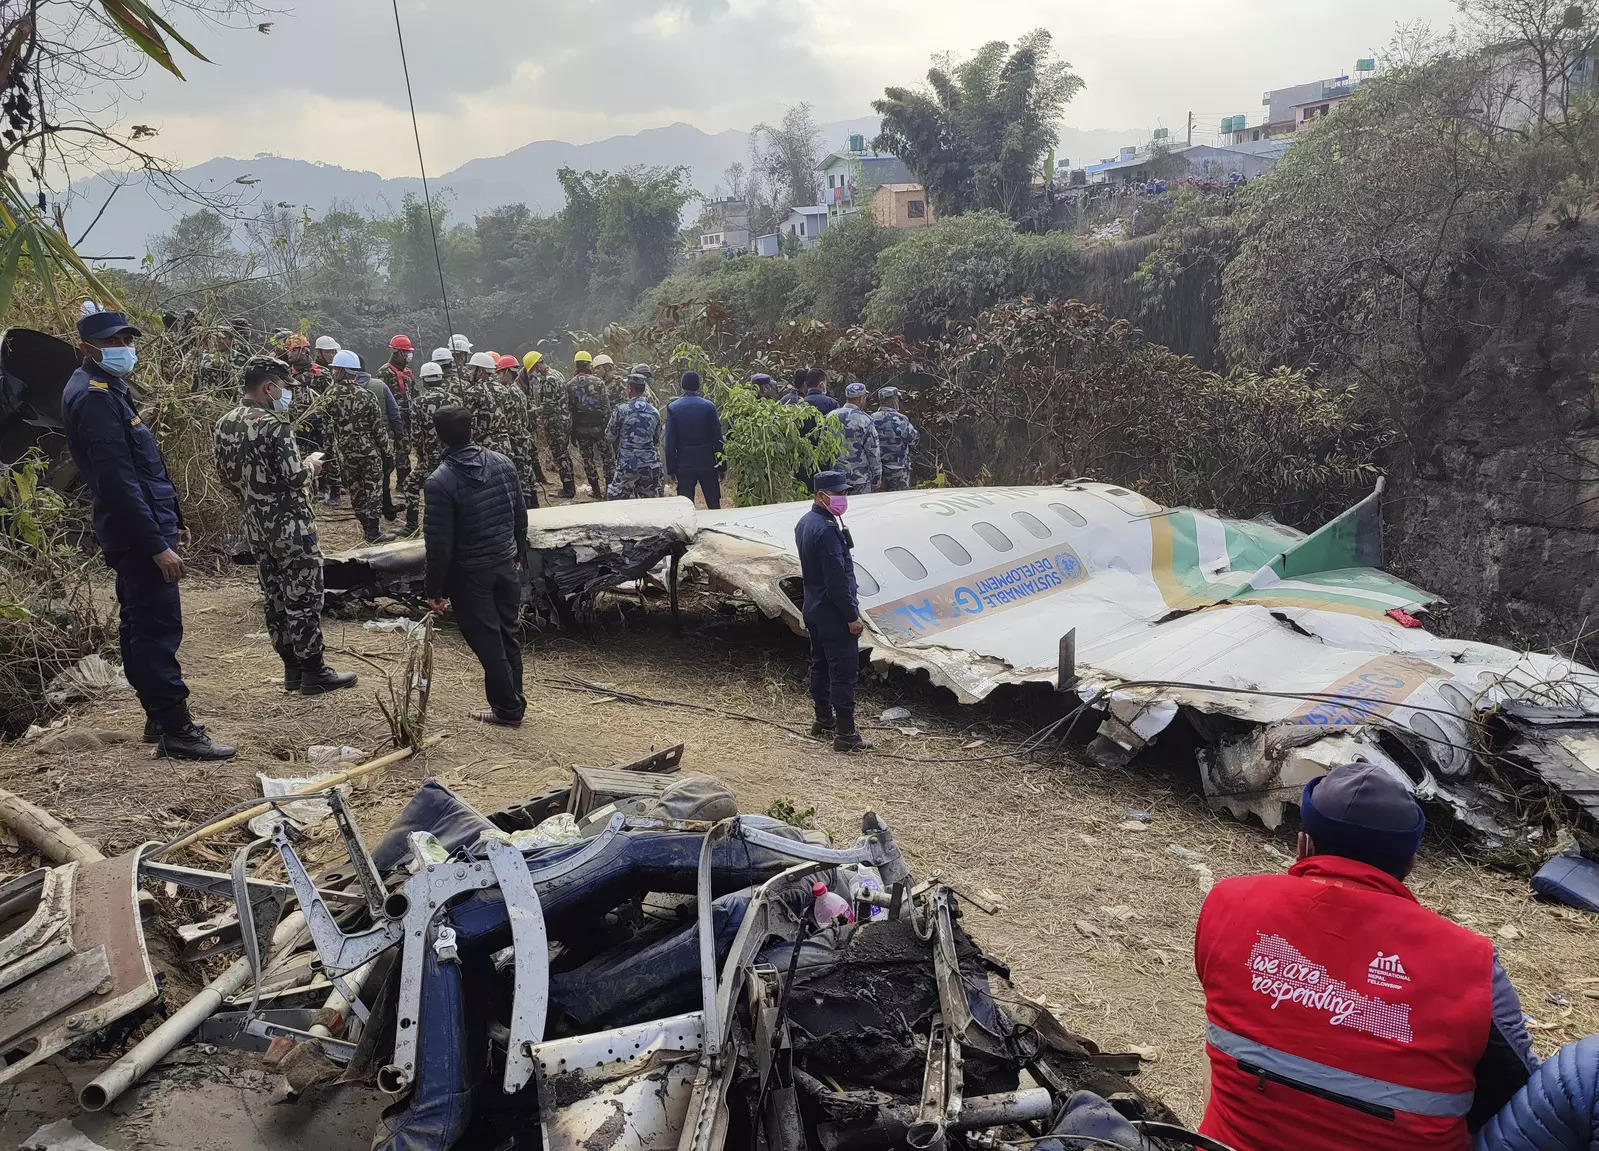 5 injured in Nepal helicopter crash